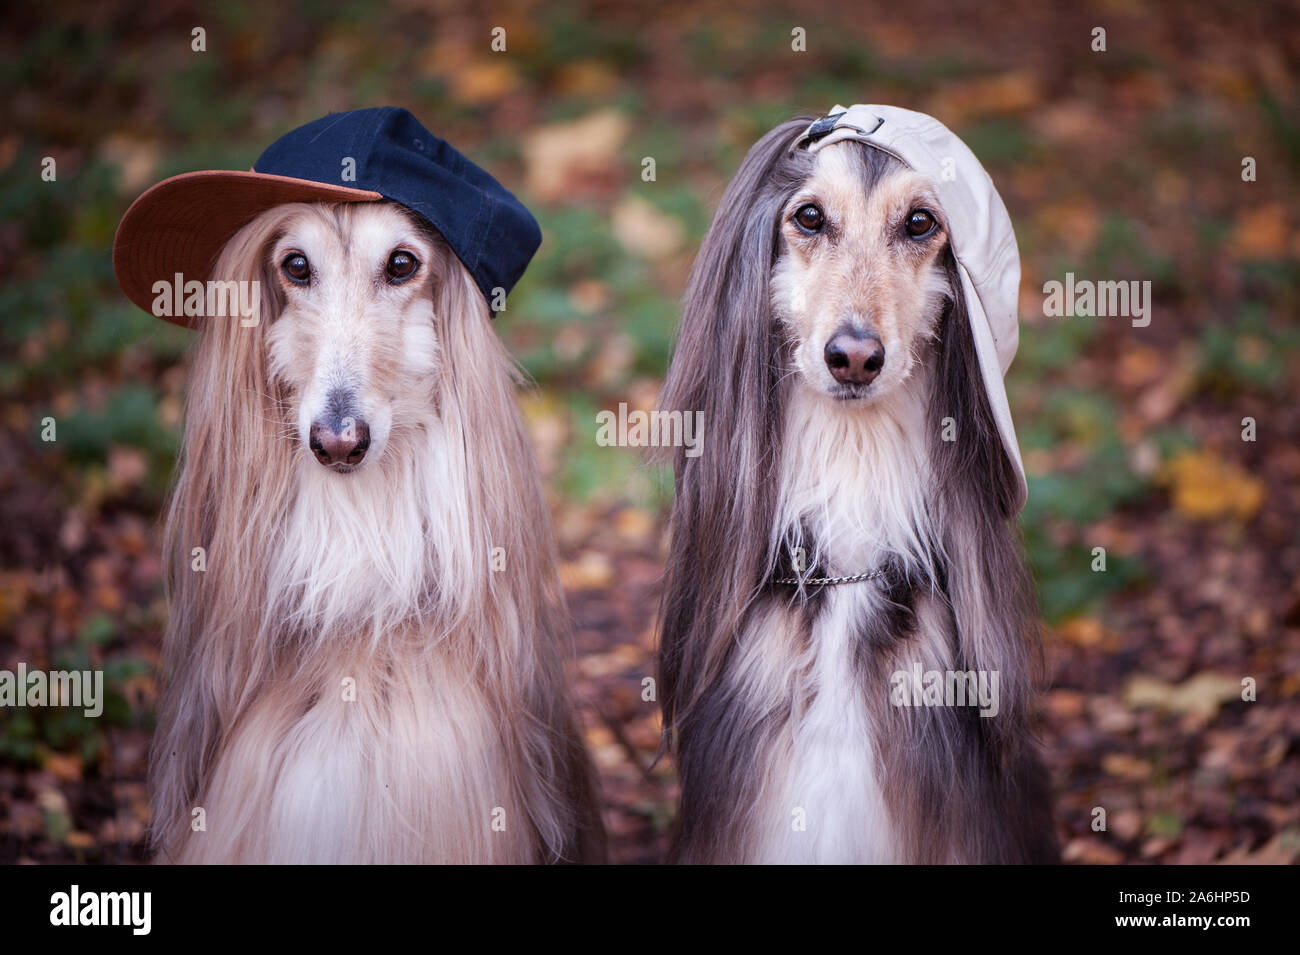 Dogs, Afghan hounds as teenagers, rappers. Dressed in stylish caps, the concept of youth fashion, clothes for dogs Stock Photo